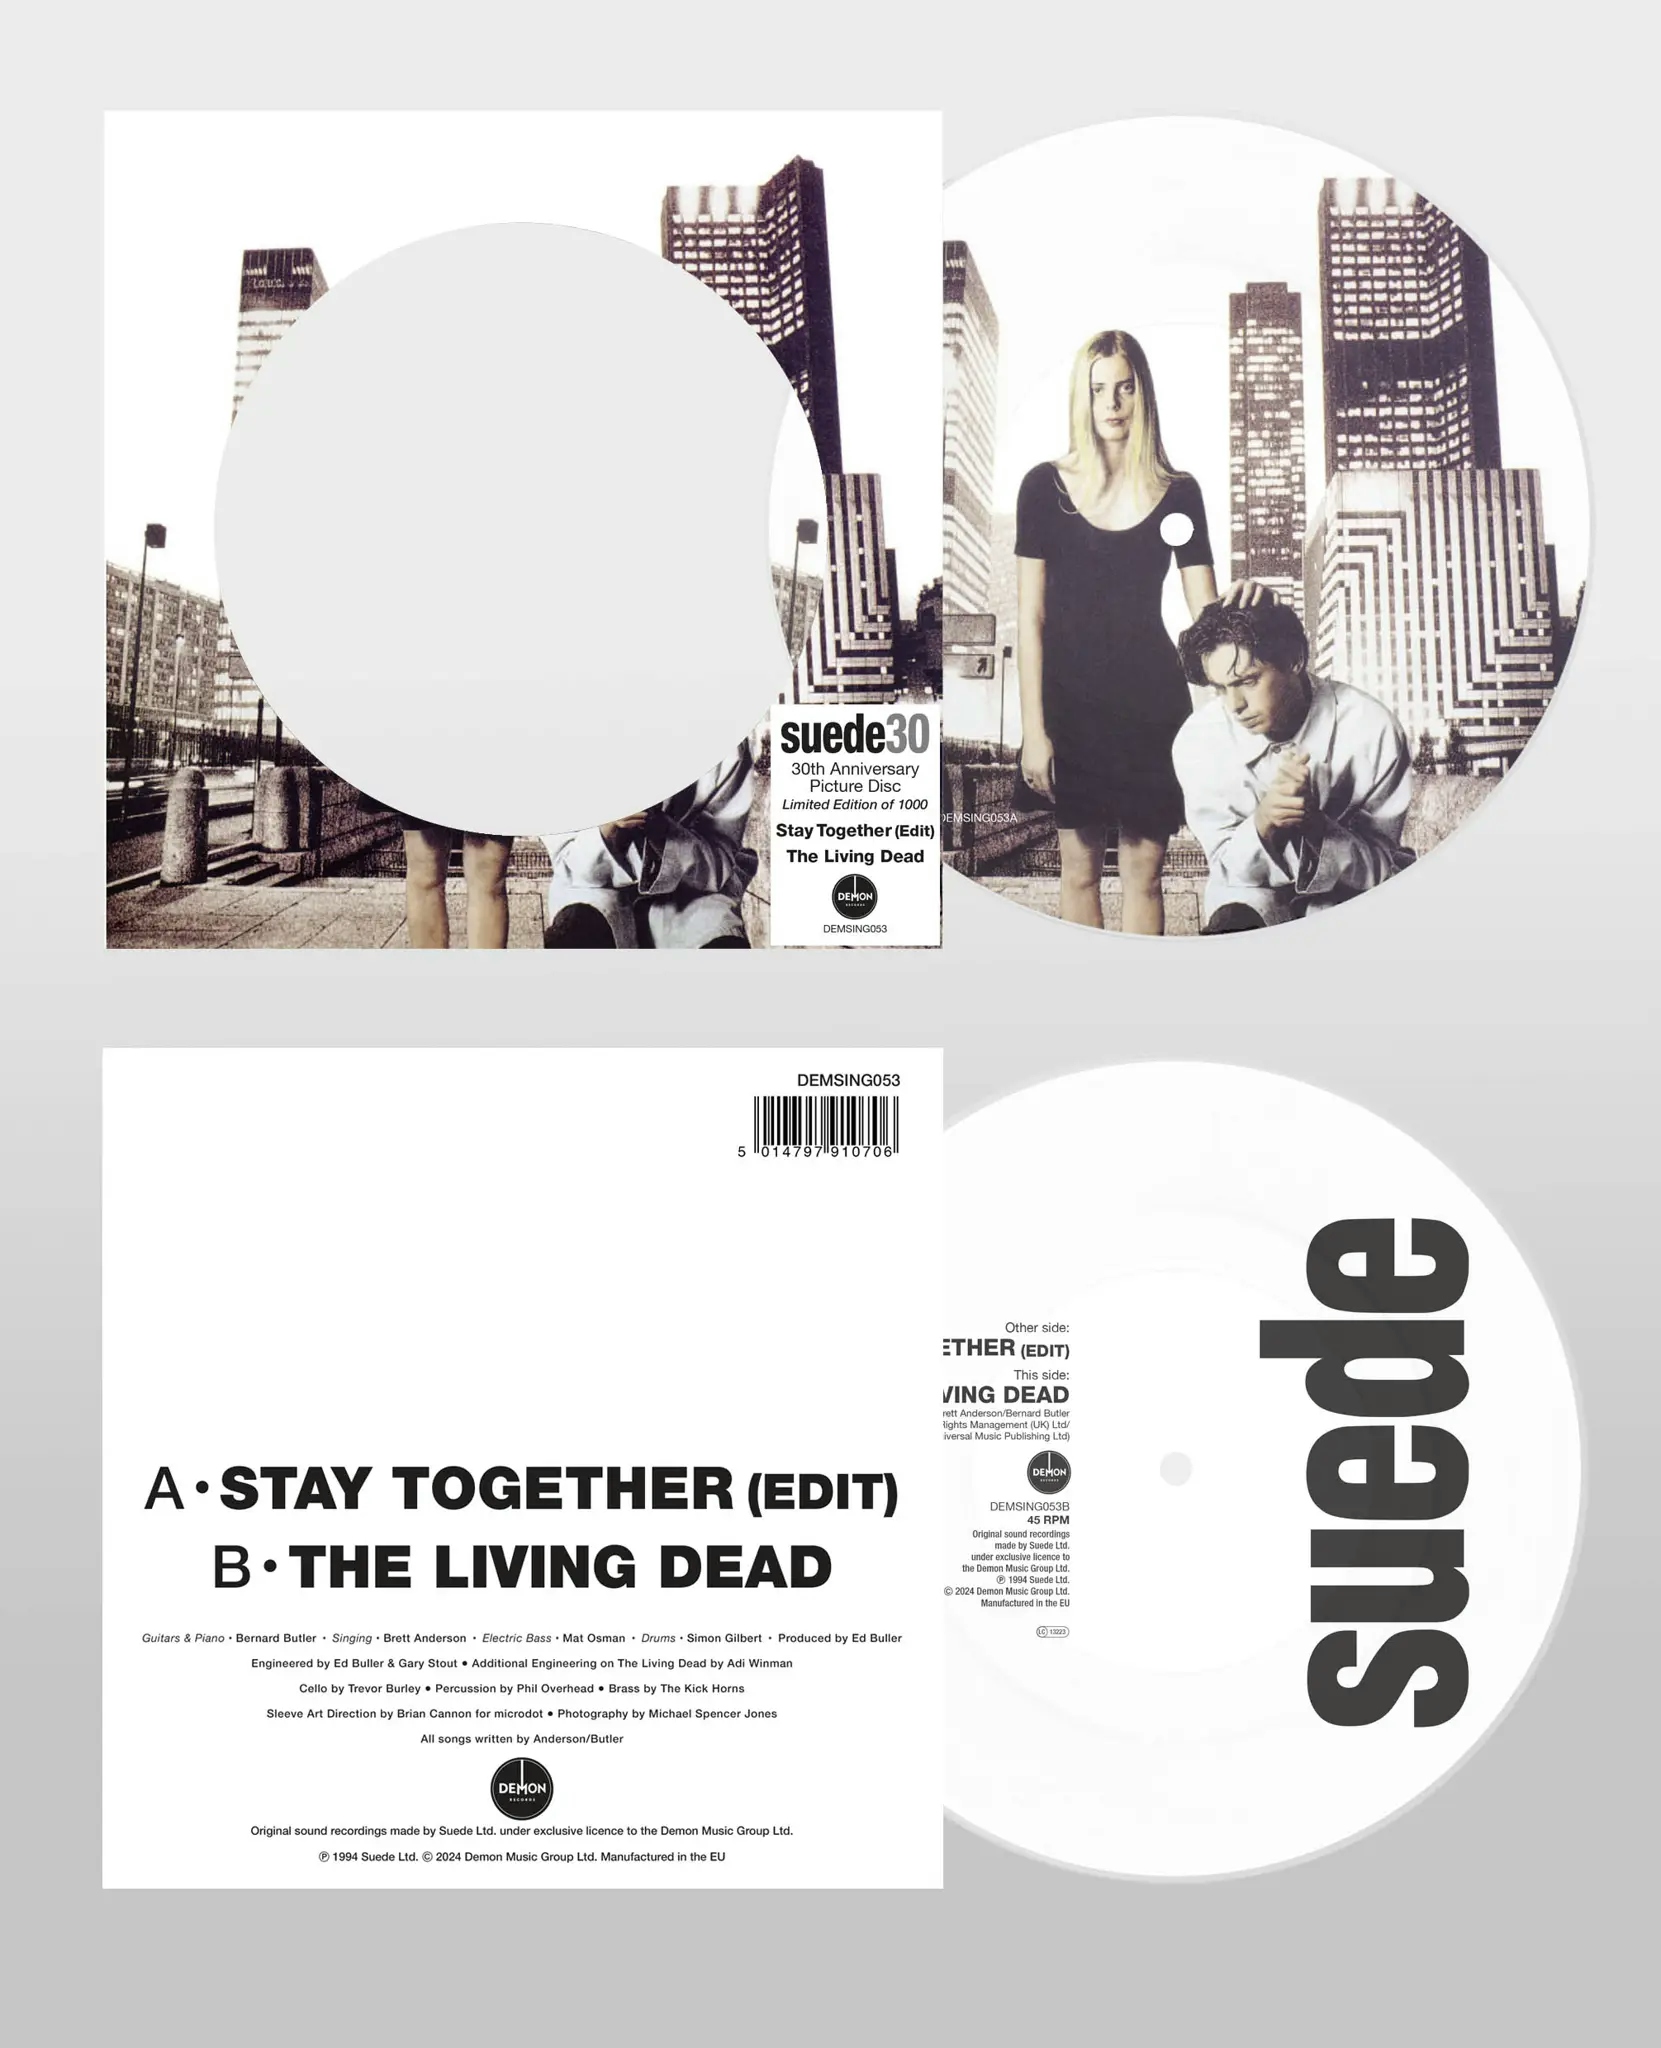 Album artwork for Stay Together  by Suede